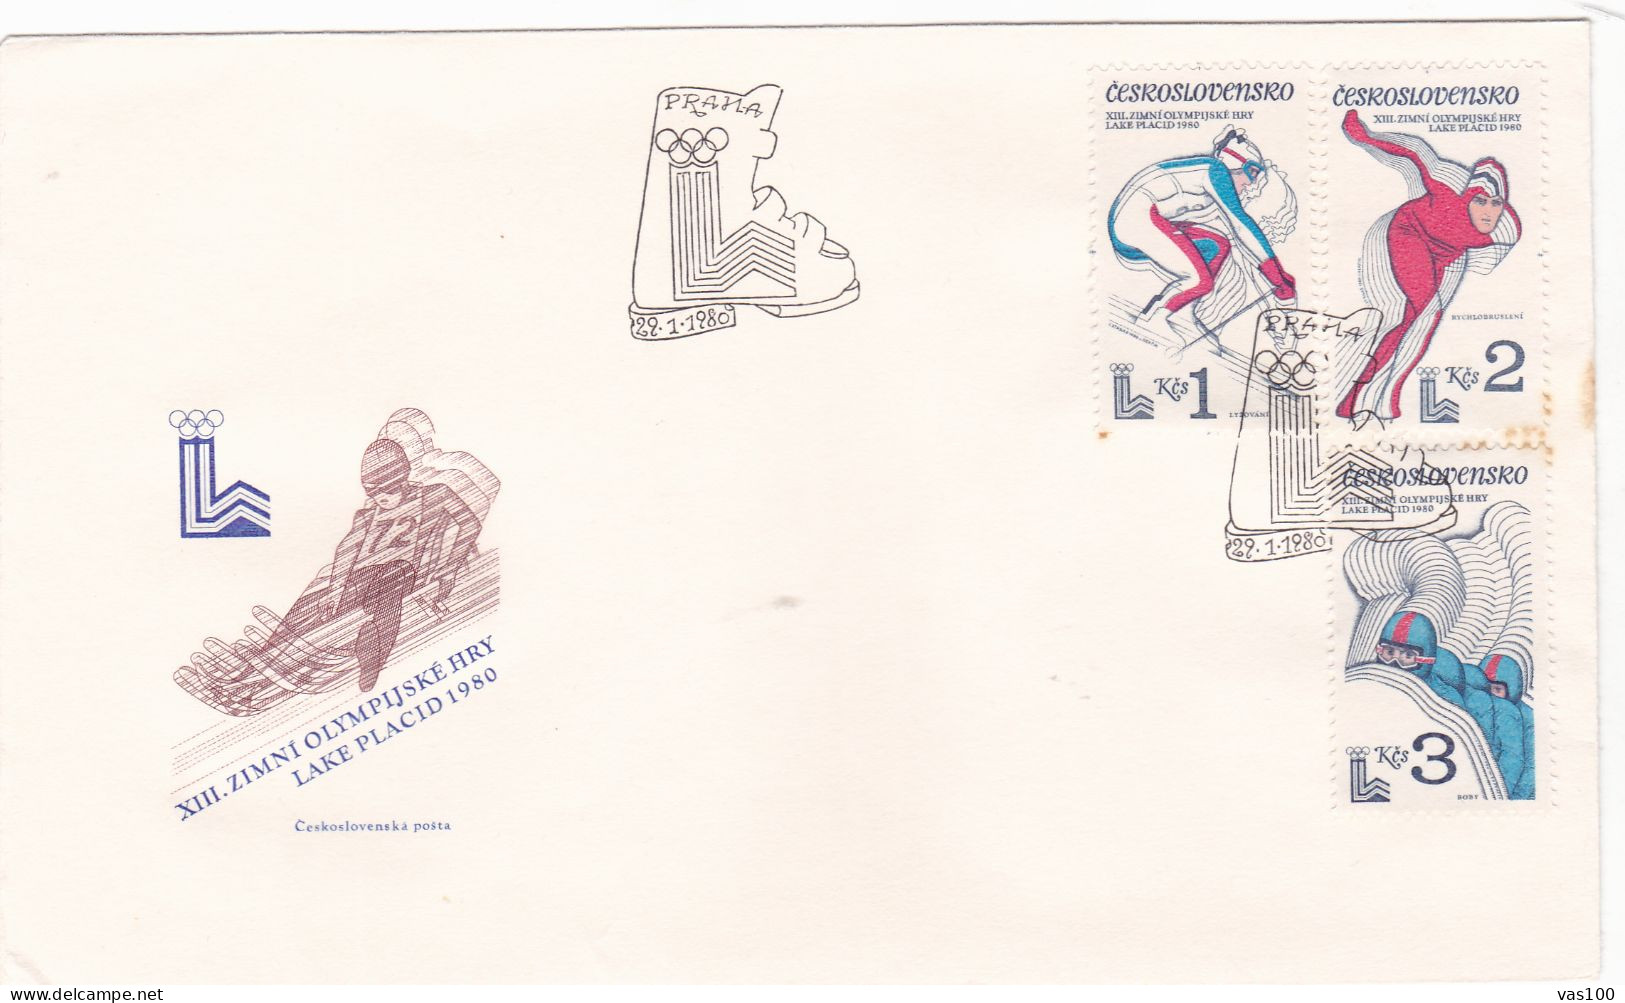 OLYMPIC GAMES LAKE PLACID 1980 COVERS  FDC  CIRCULATED  Tchécoslovaquie - Lettres & Documents